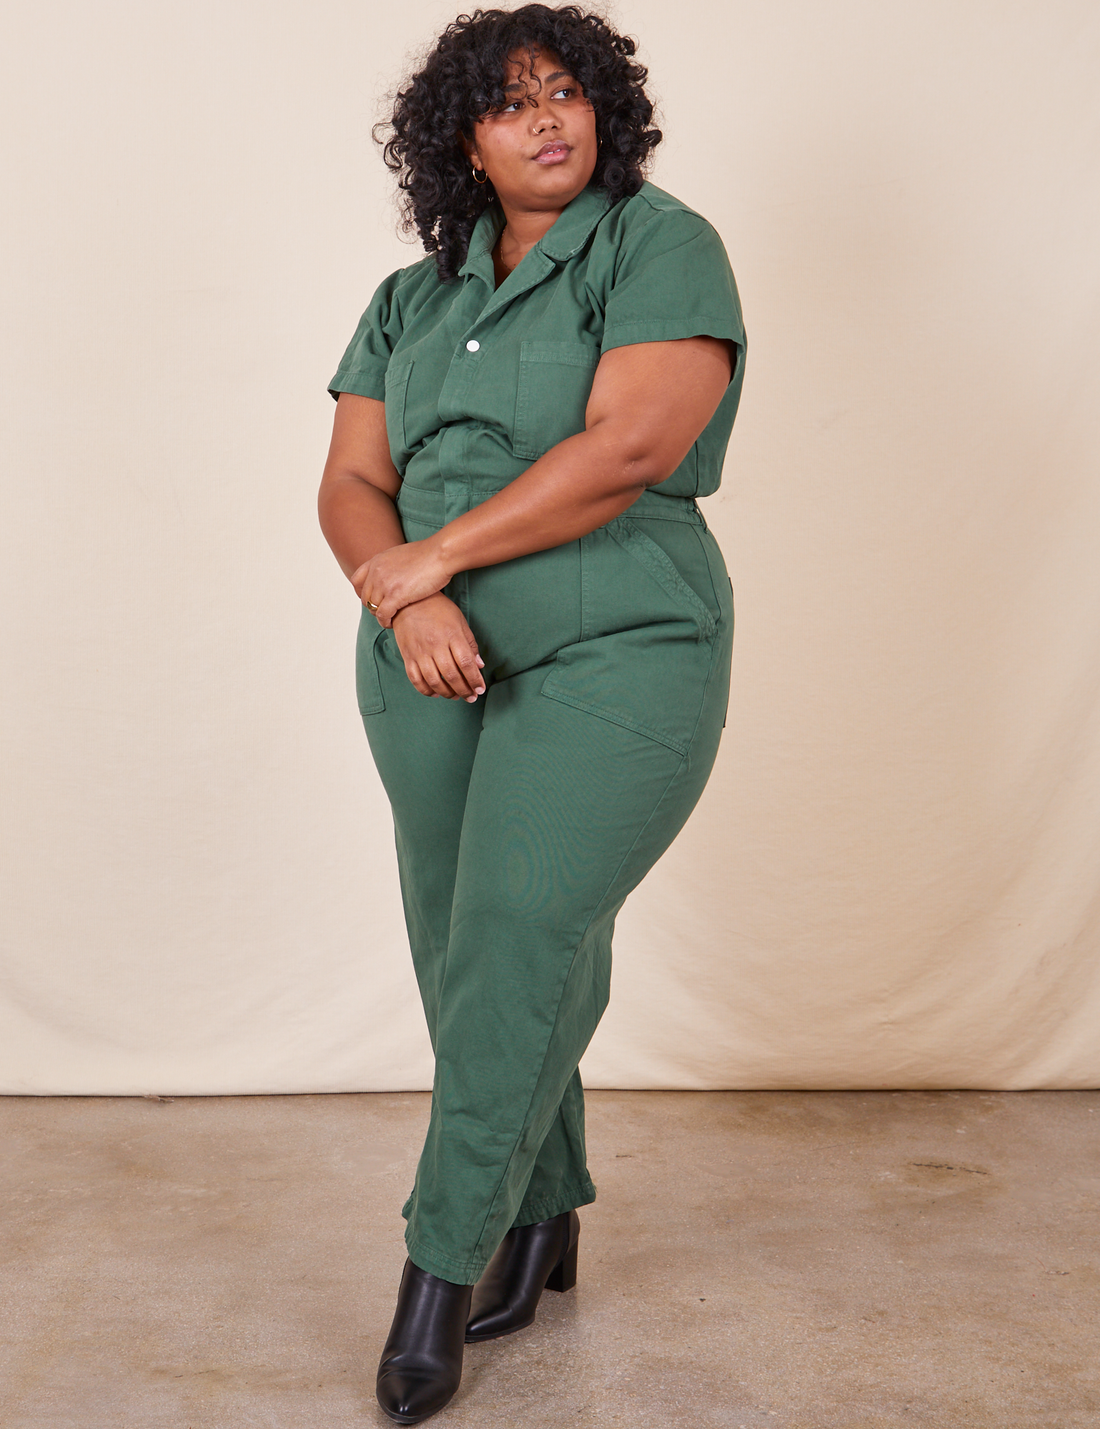 Morgan is 5'5" and wearing 2XL Short Sleeve Jumpsuit in Dark Emerald Green 